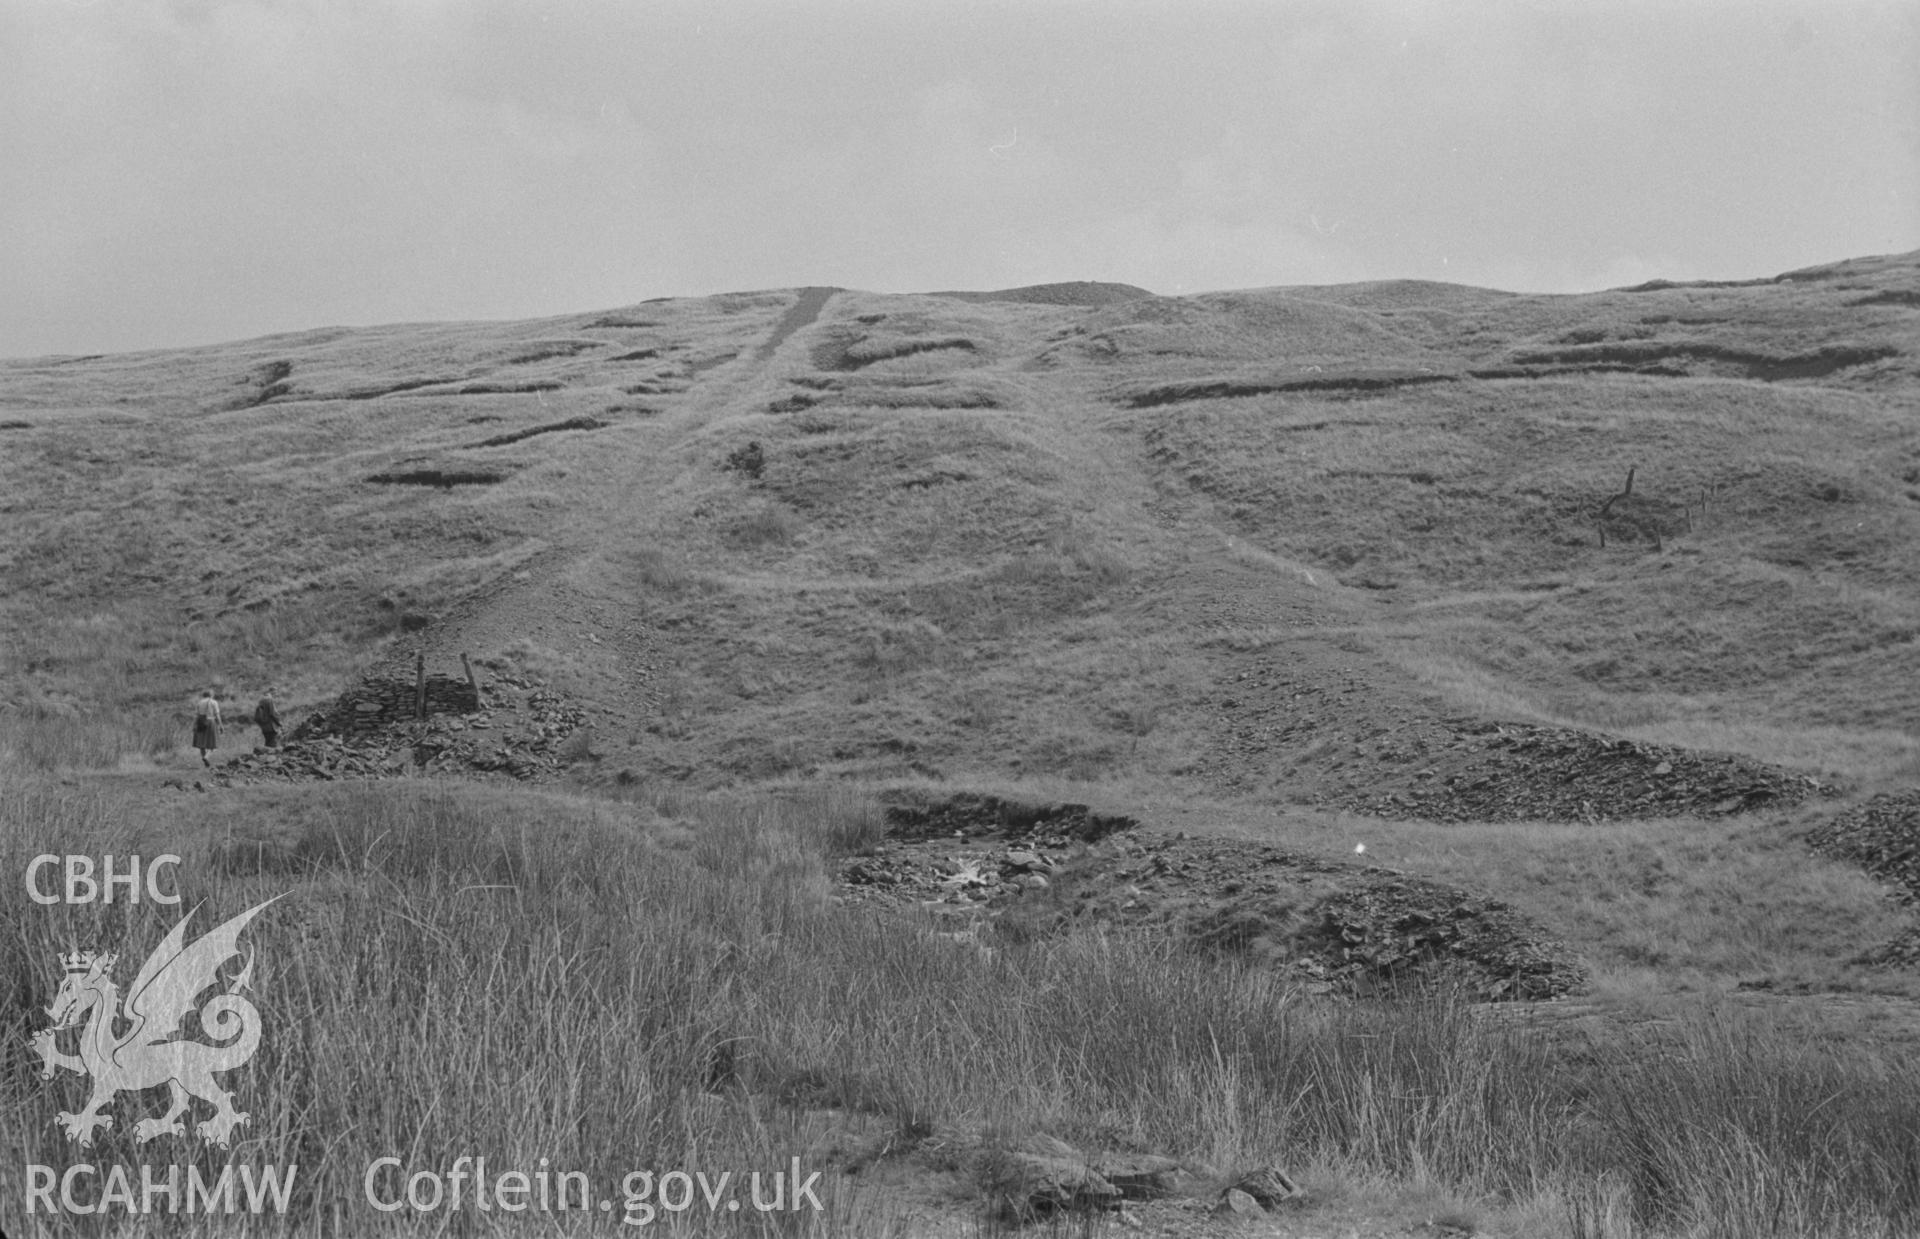 Digital copy of a black and white negative showing view looking up line of ballast of old tramway from Plynlimon mine up to shafts on slope to east. Photographed by Arthur O. Chater in August 1967. (Looking east from Grid Reference SN 796 858).